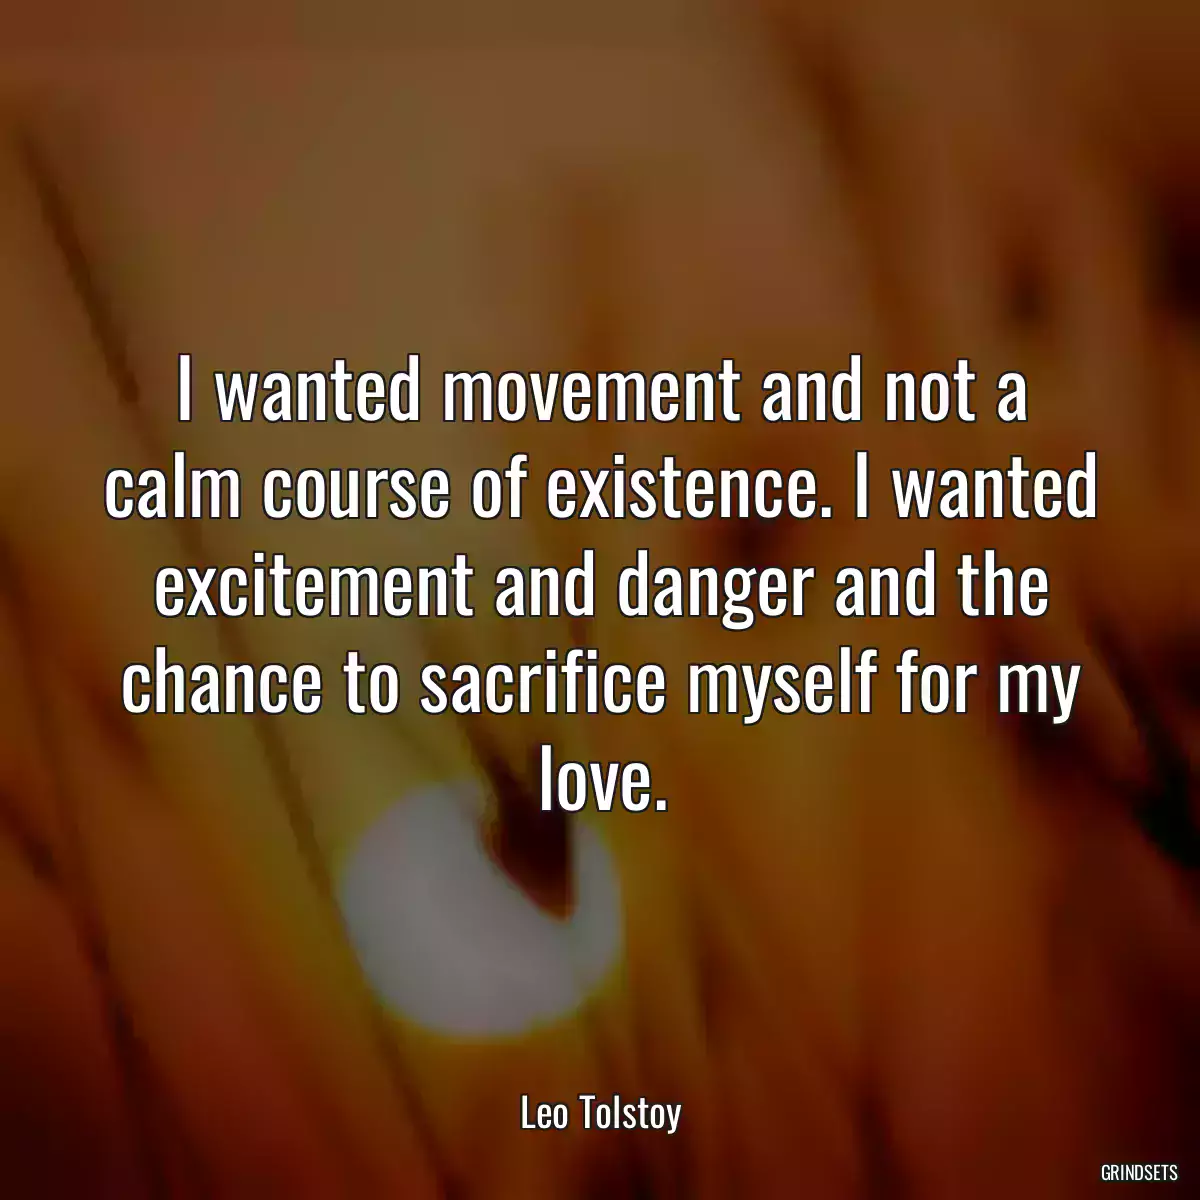 I wanted movement and not a calm course of existence. I wanted excitement and danger and the chance to sacrifice myself for my love.